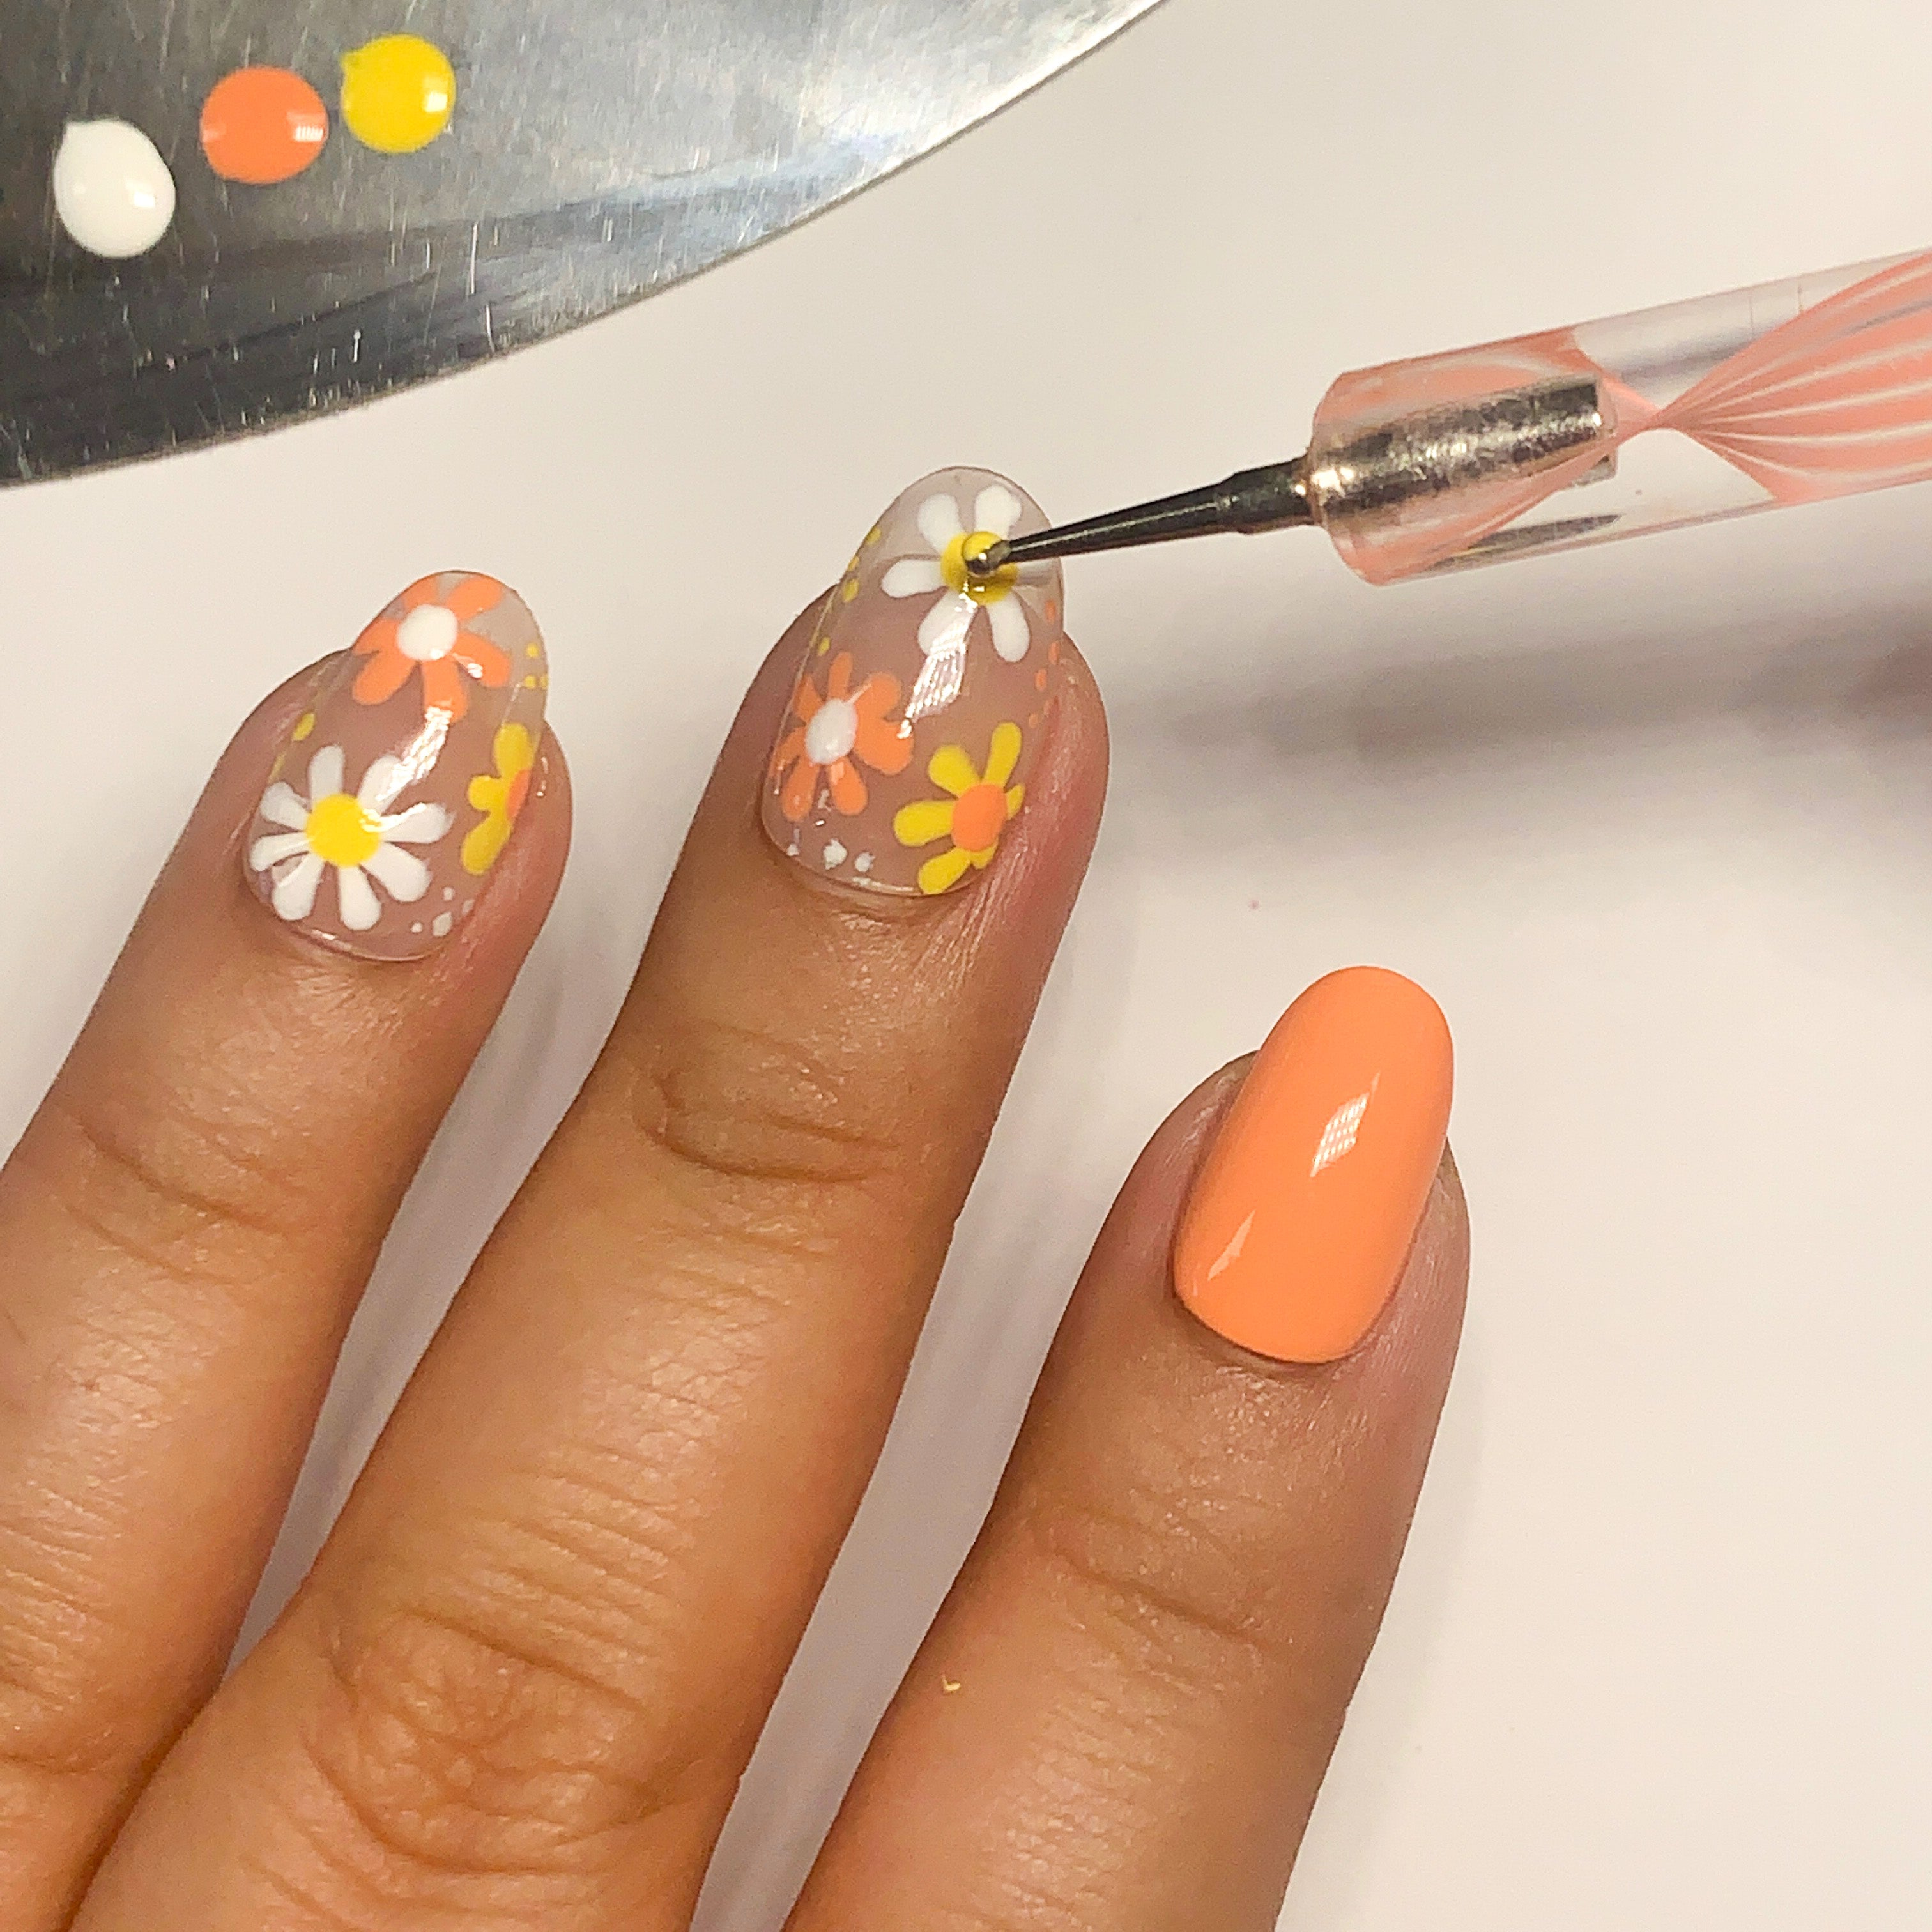 nail art designs step by step at home without tools